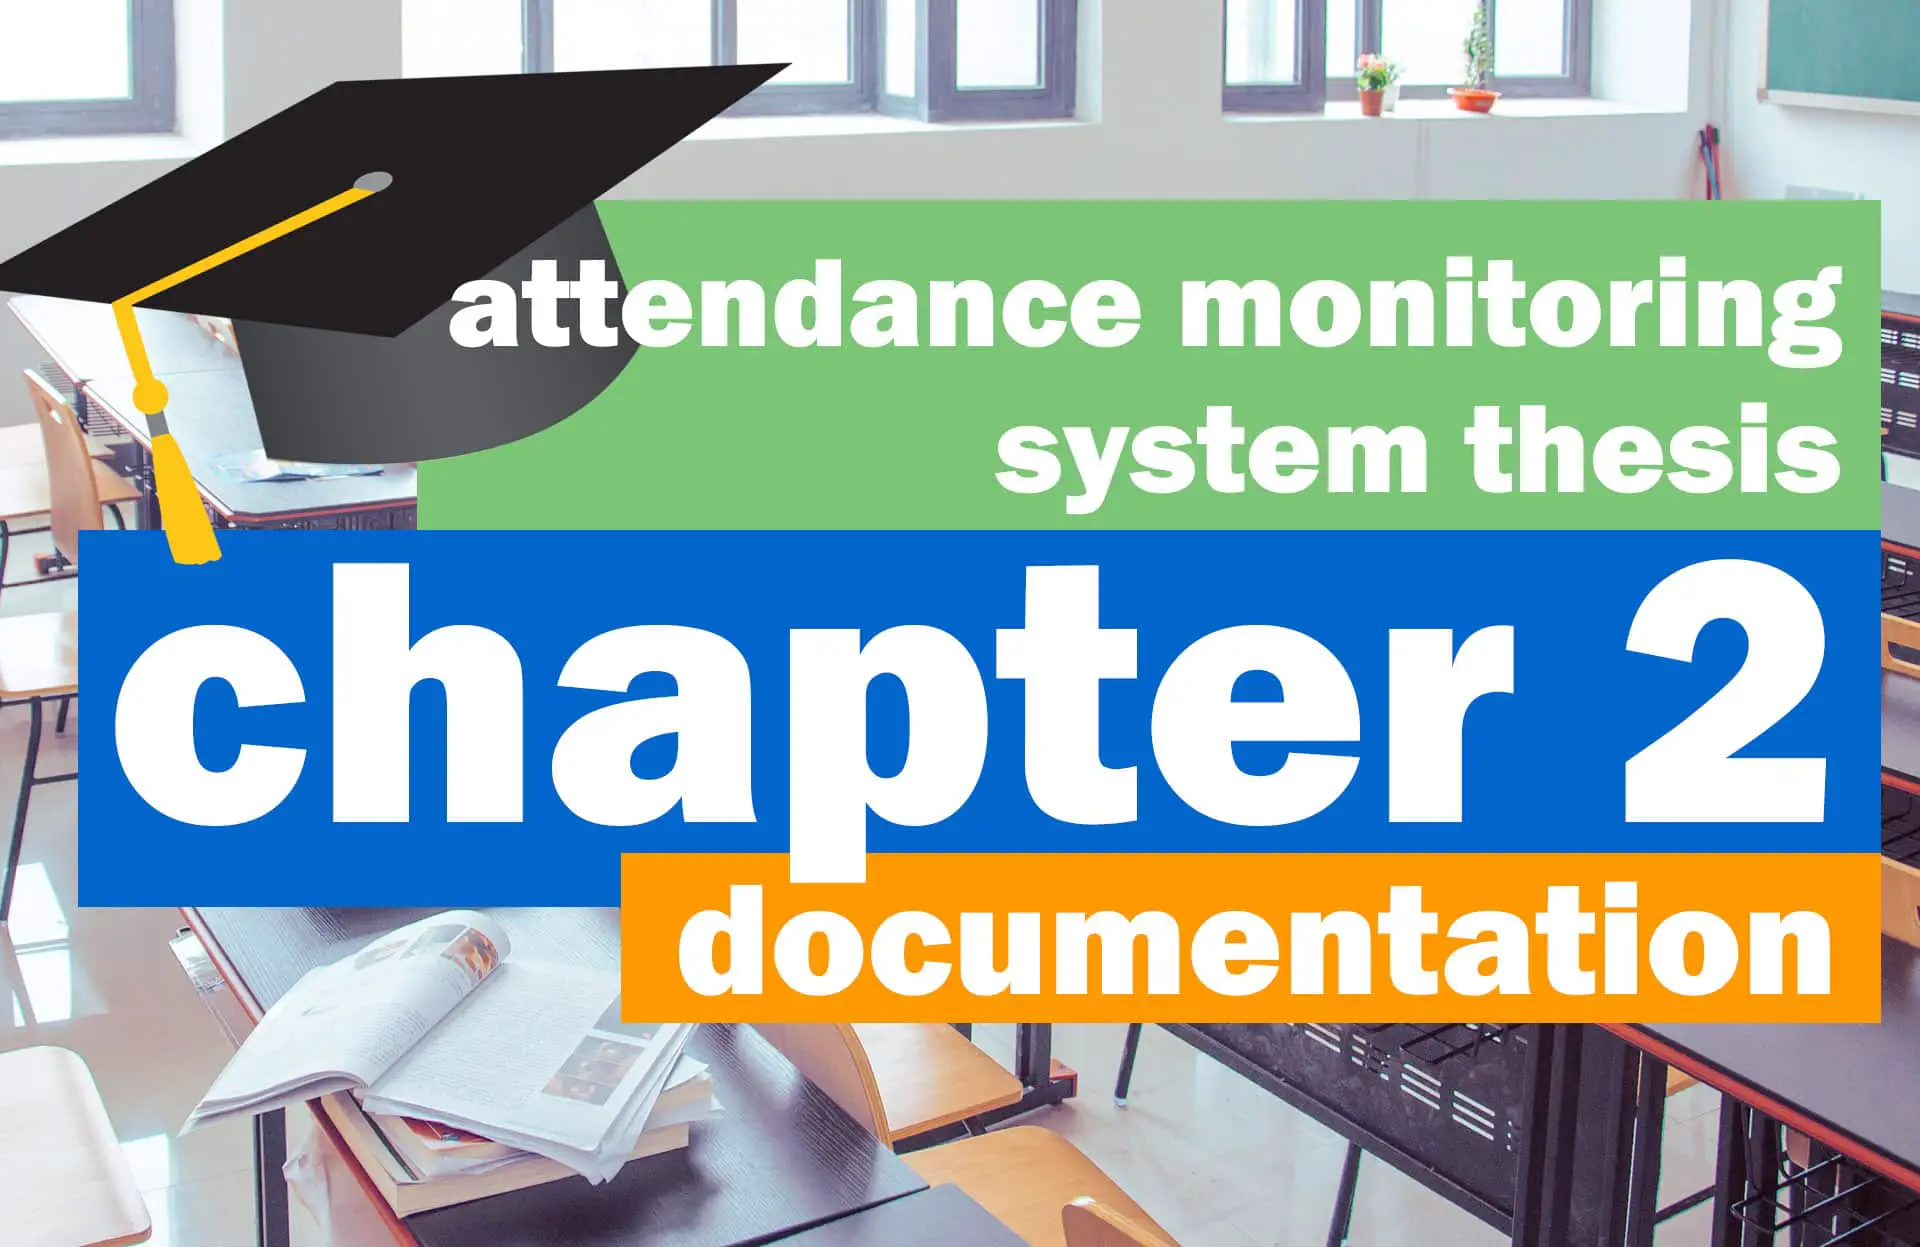 attendance monitoring system thesis chapter 2 documentation